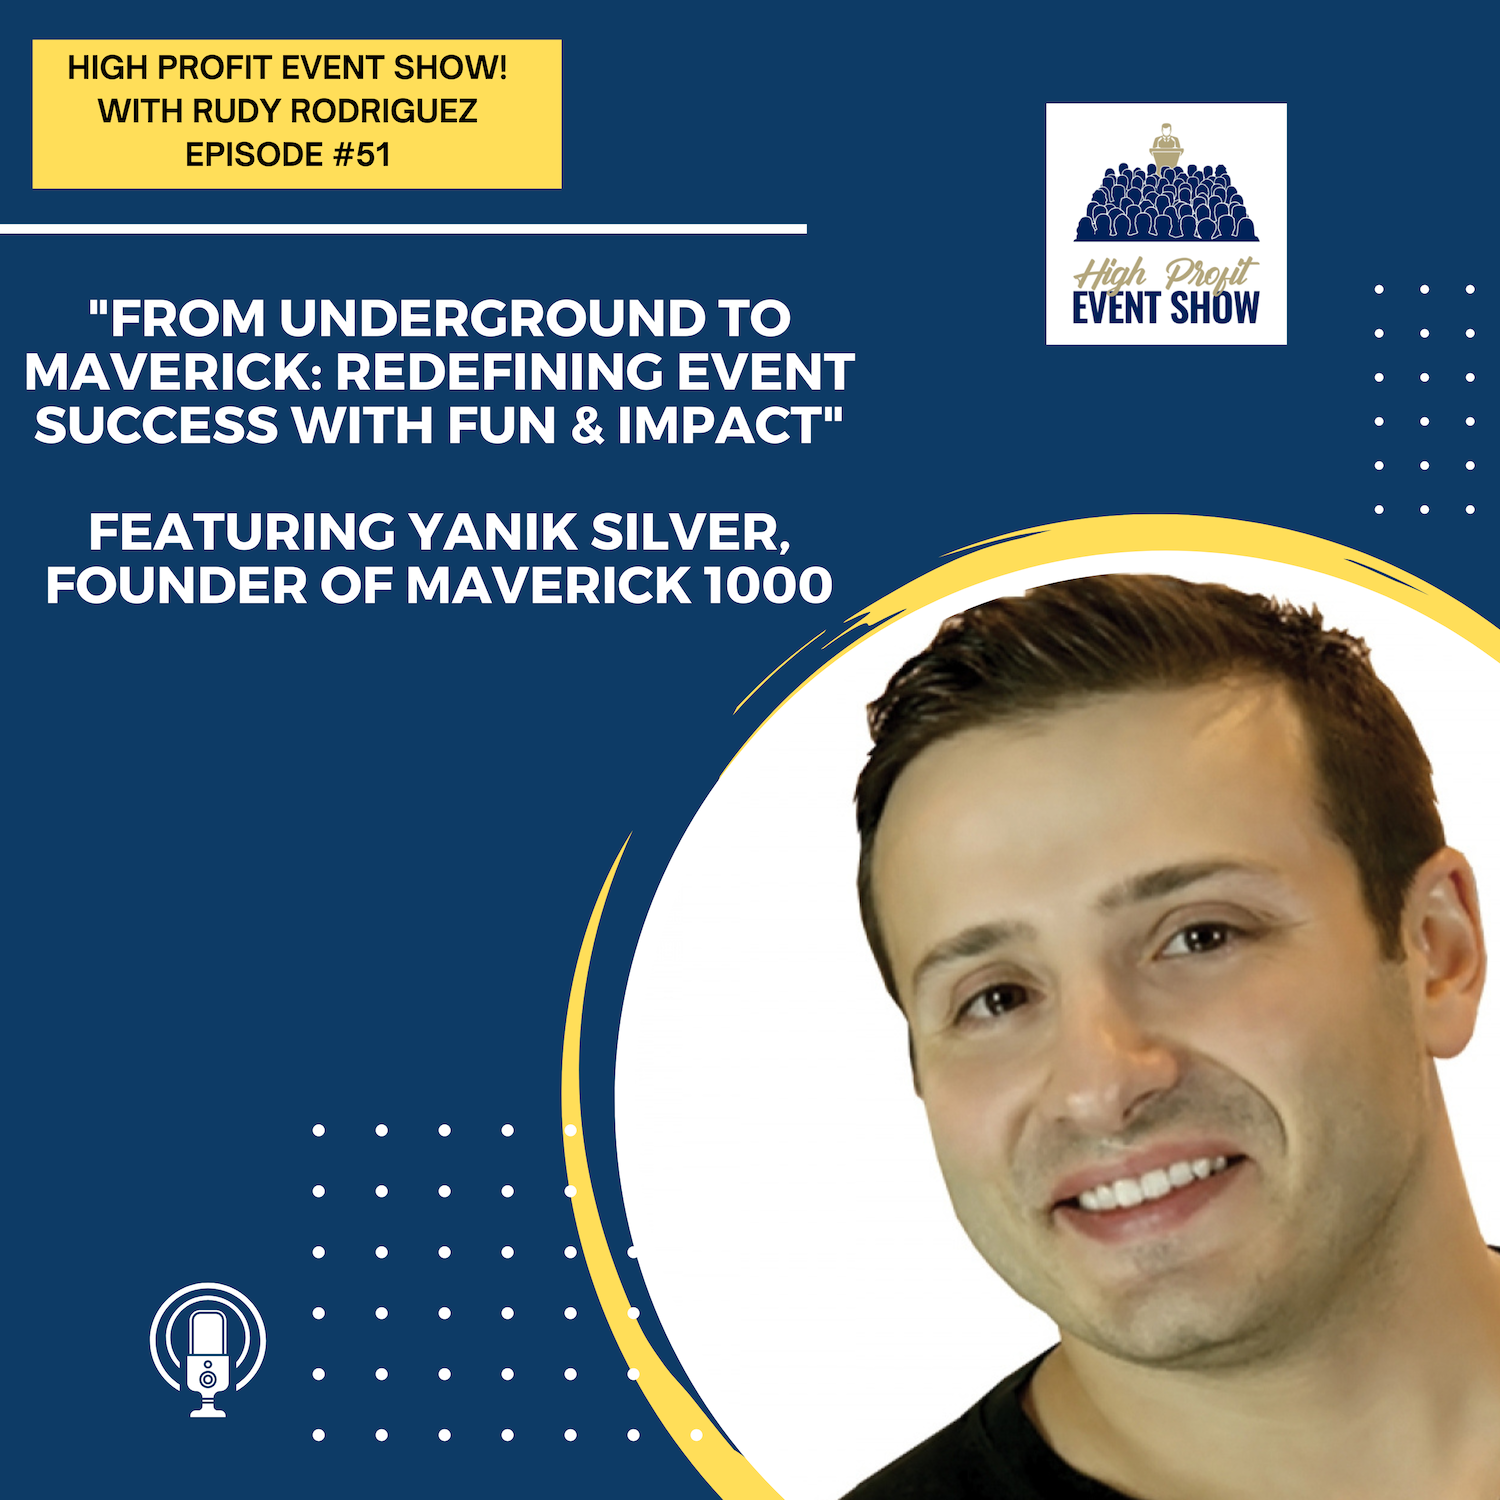 Episode 51: “From Underground to Maverick: Redefining Event Success with Fun & Impact with Yanik Silver!